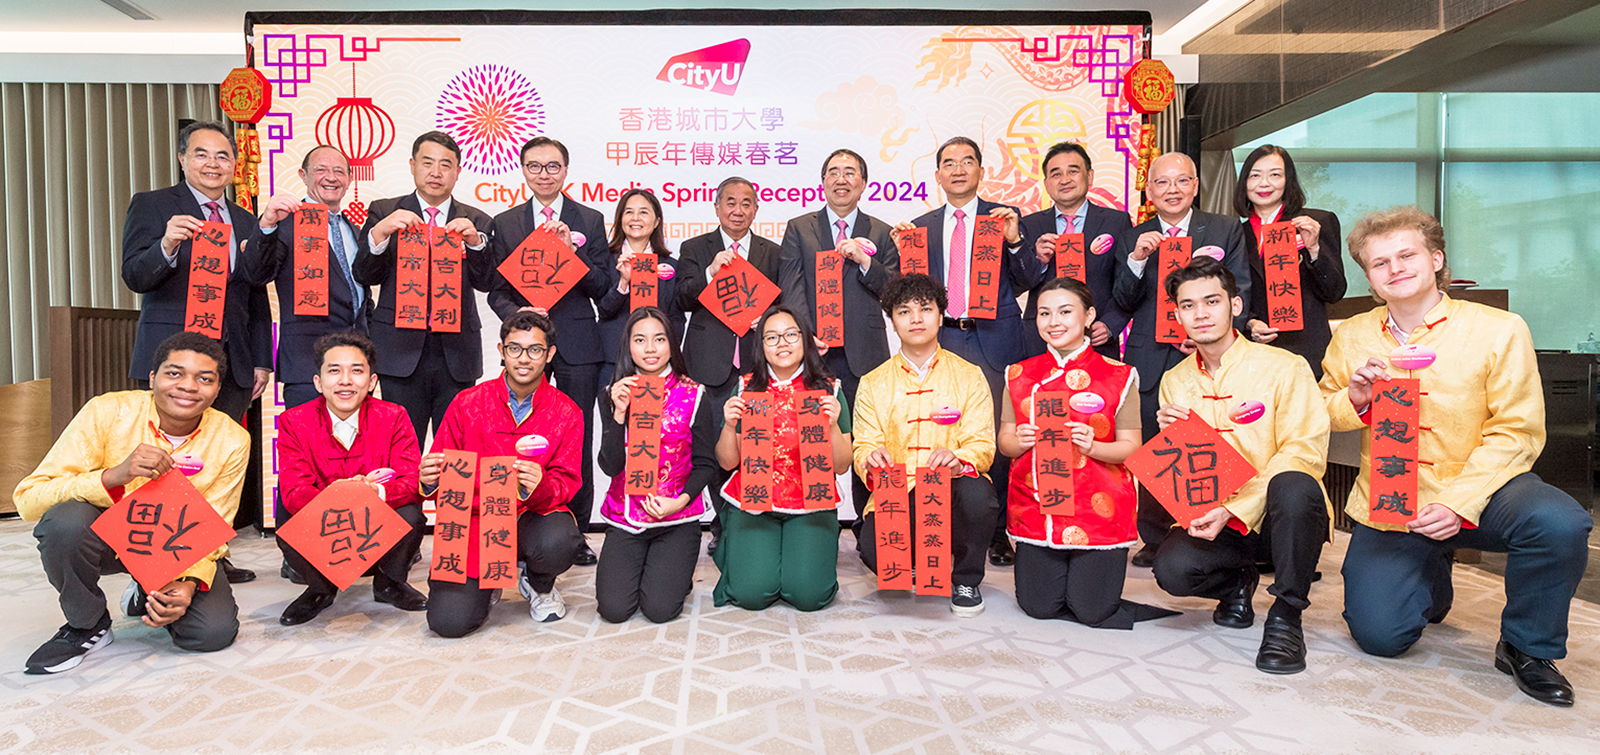 International students, dressed in traditional Chinese New Year attire, participated in the event and wrote calligraphy fai chun, wishing CityUHK and everyone a prosperous Year of the Dragon.